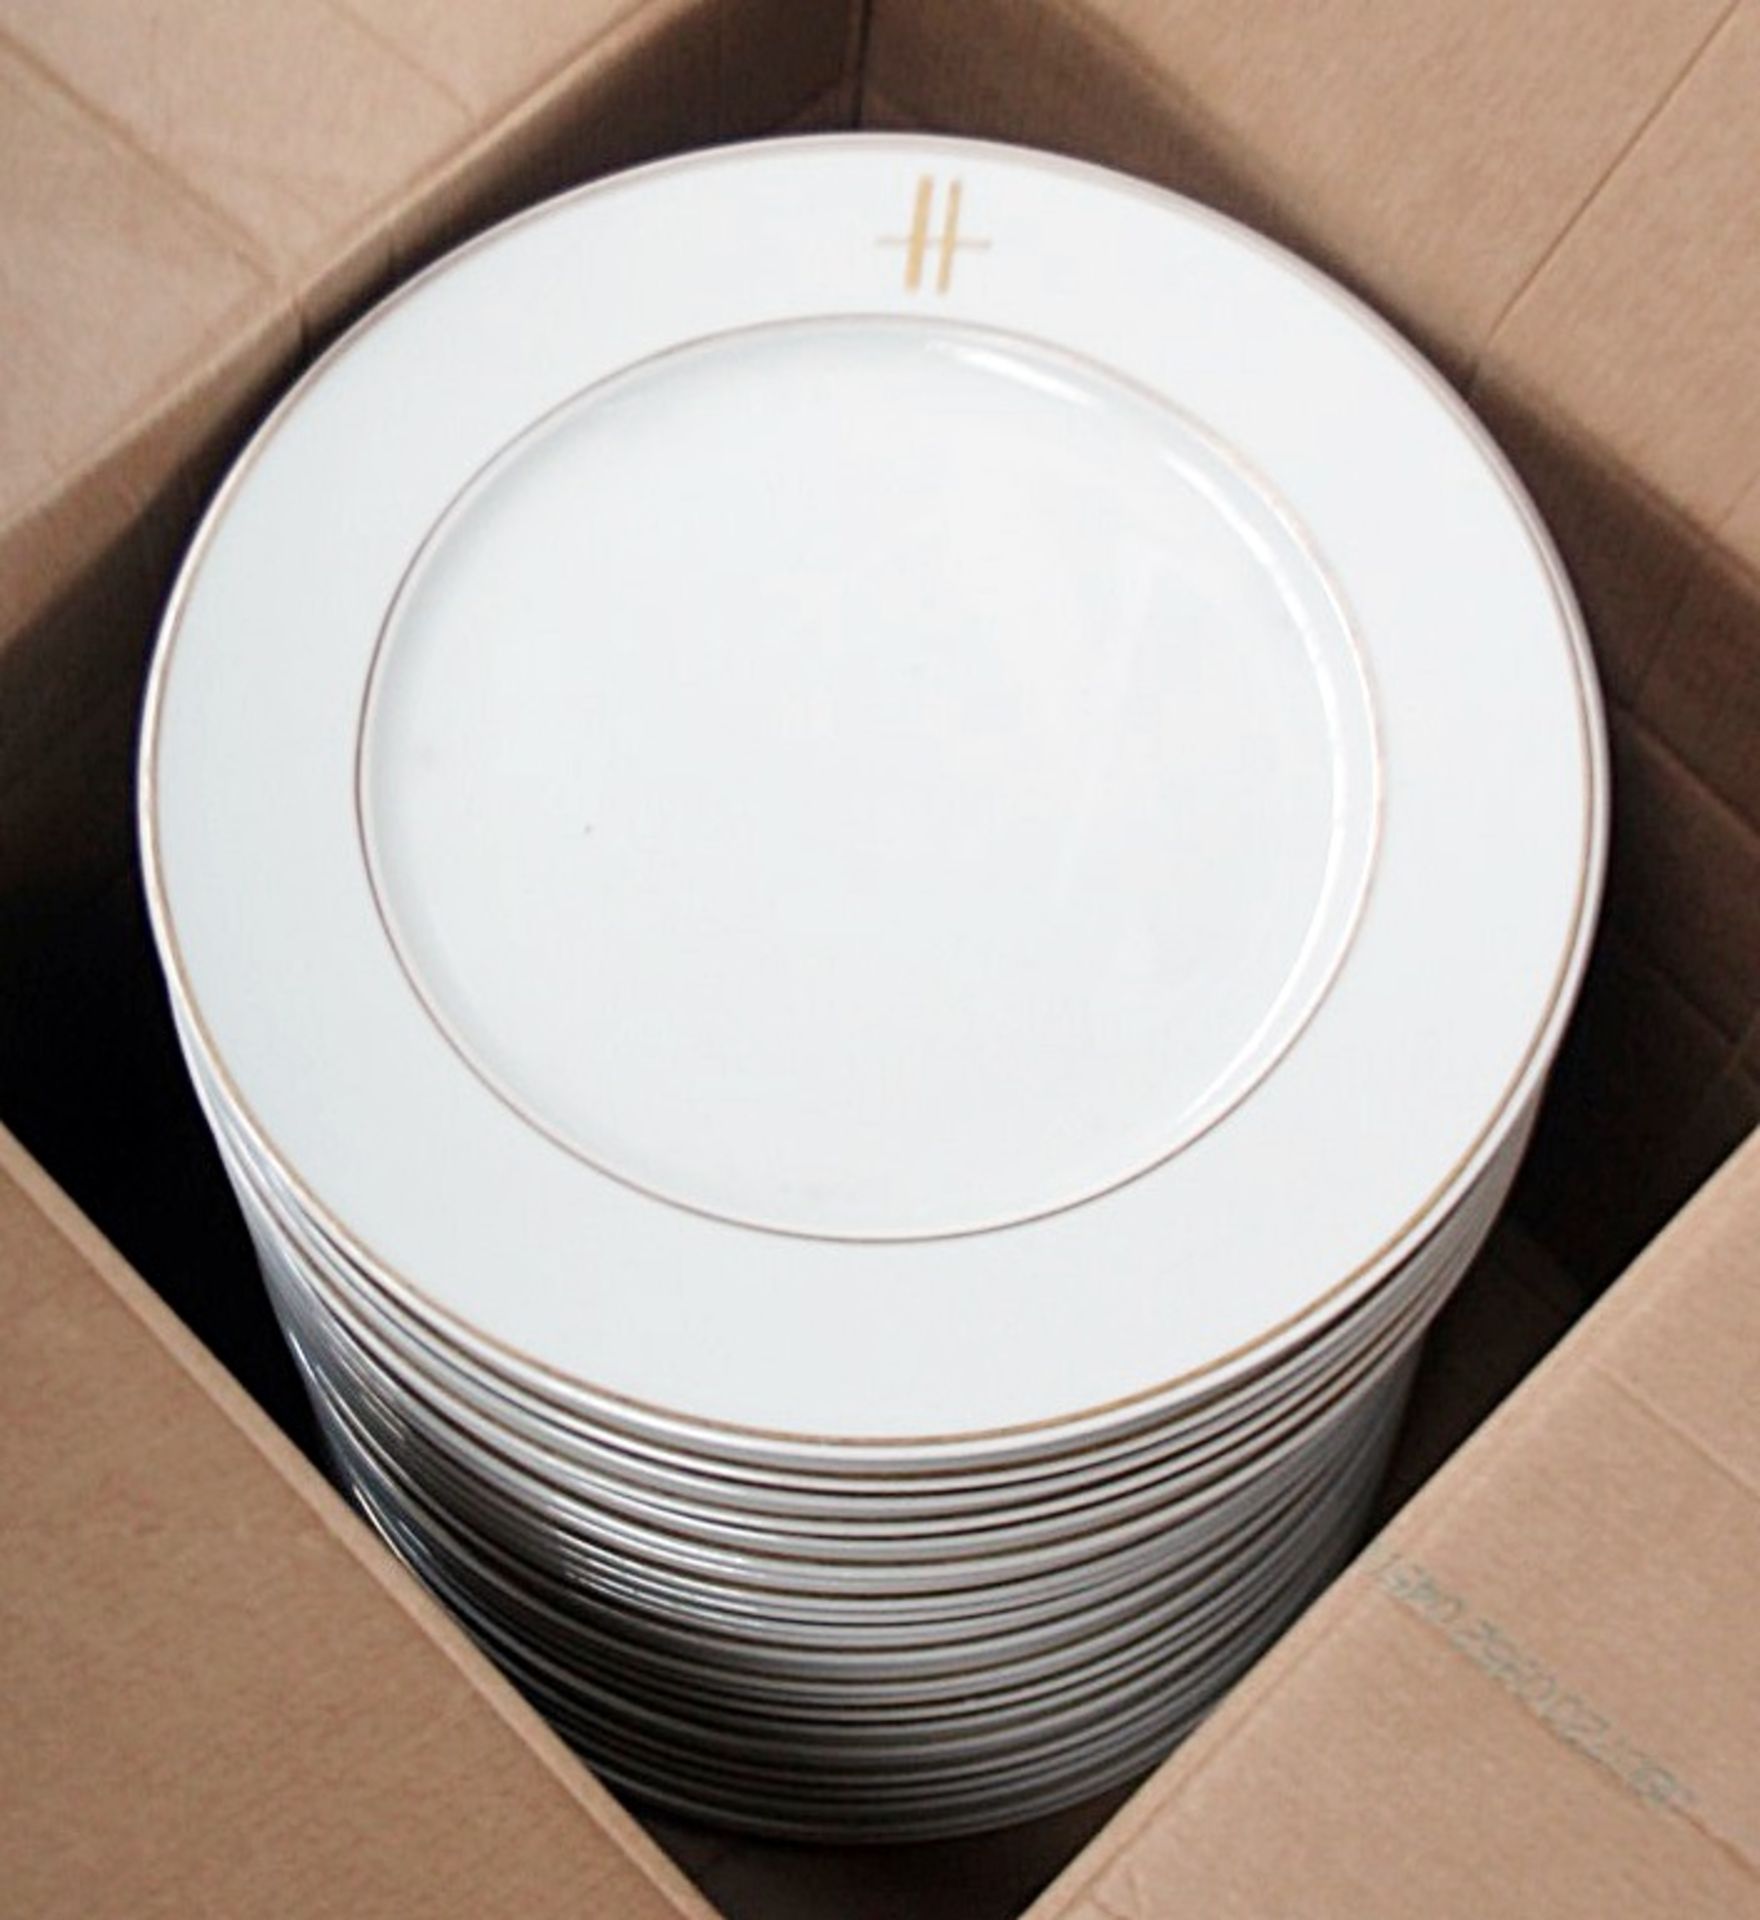 25 x PILLIVUYT Porcelain Dinner Plates In White Featuring 'Famous Branding' In Gold - Dimensions: